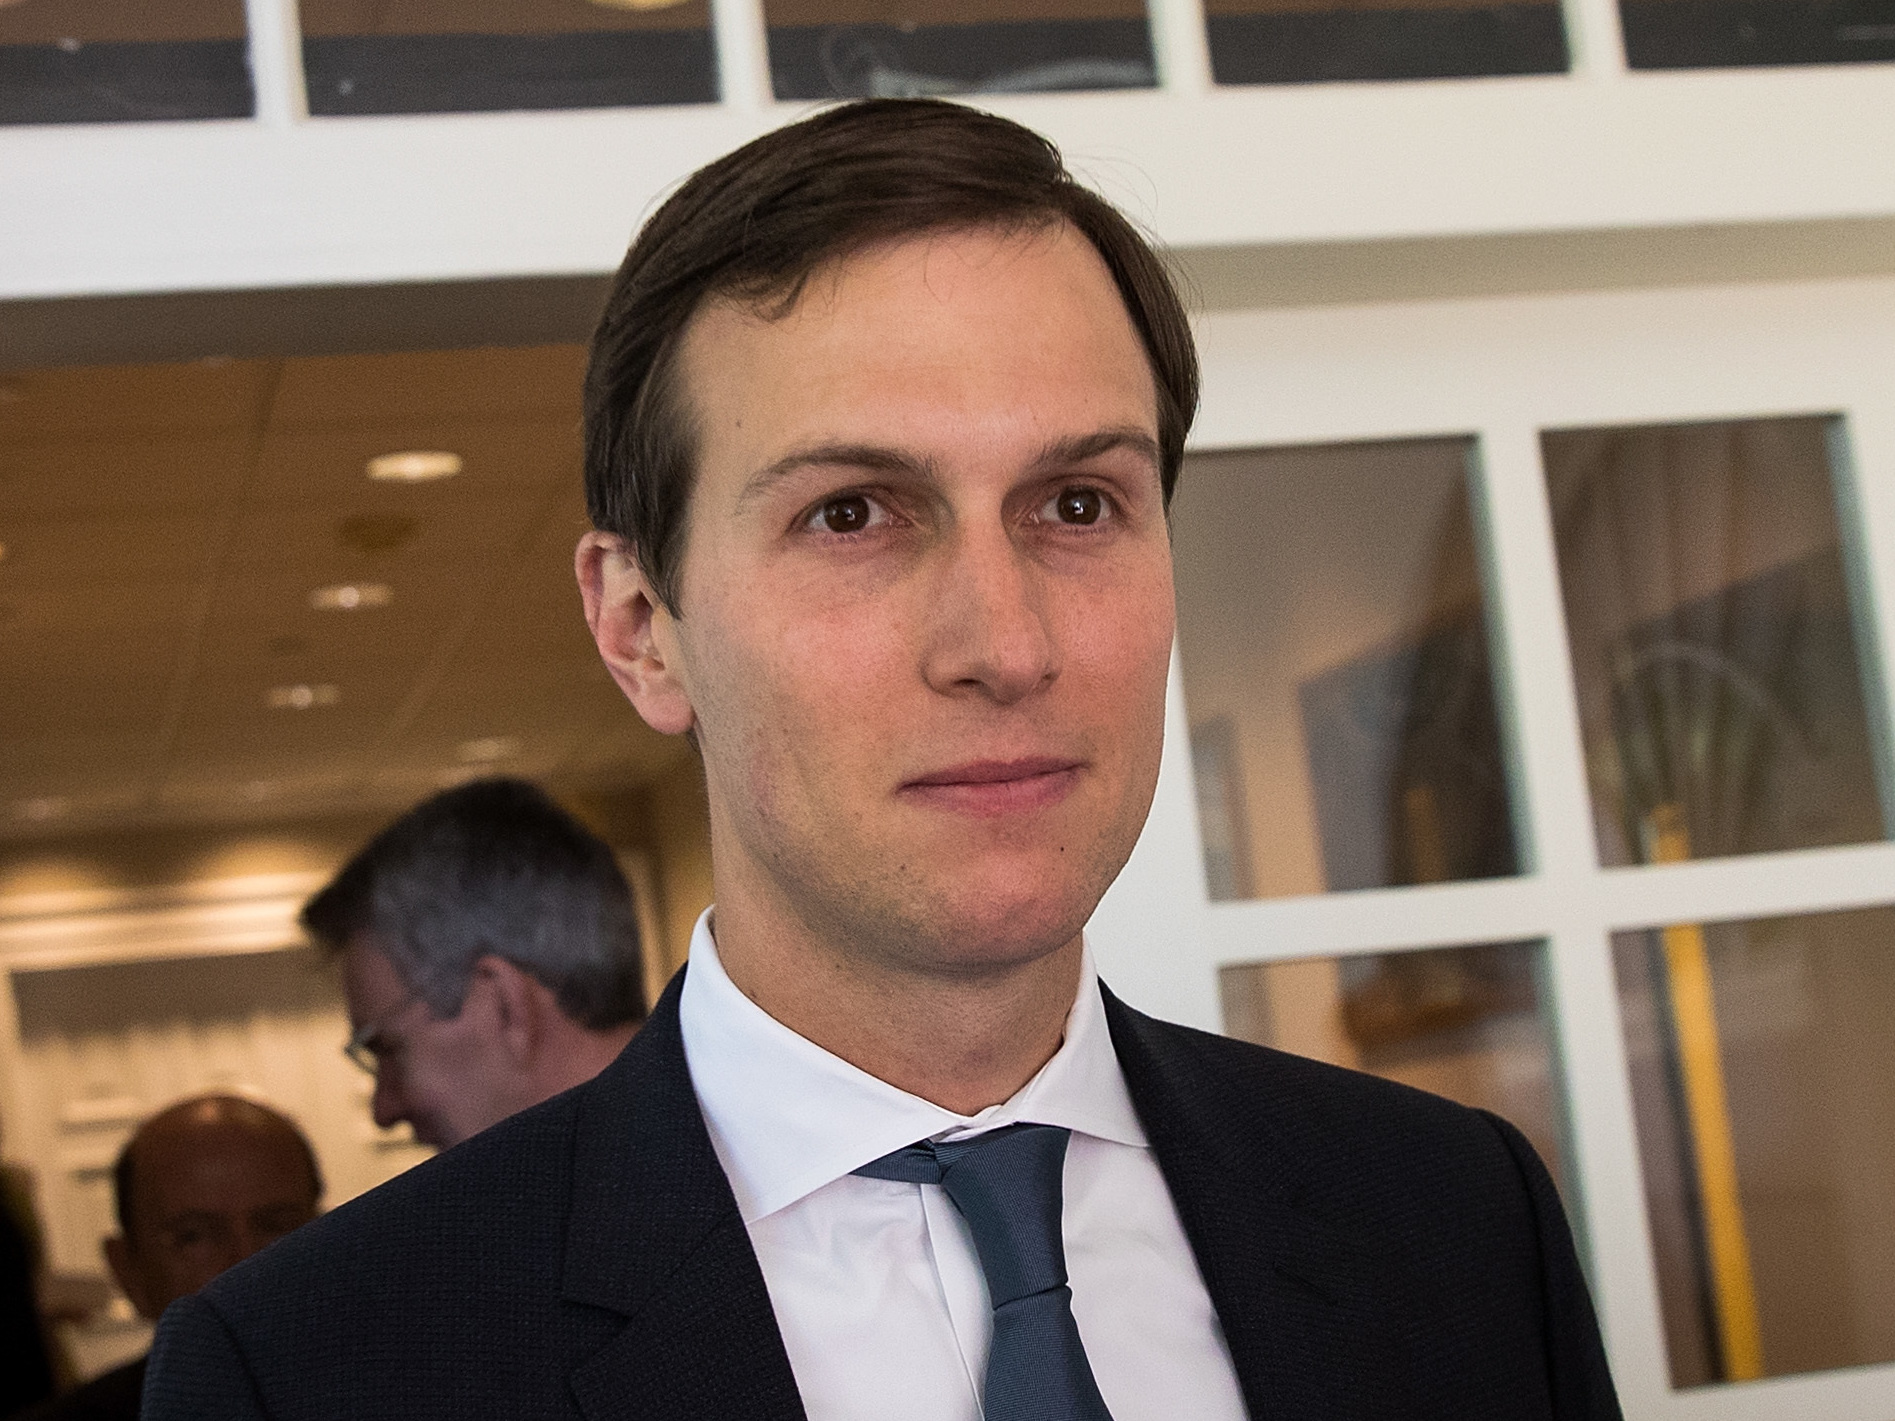 White House senior adviser Jared Kushner, President Trump's son-in-law, will lose access to the most sensitive material to which he previously had access.
